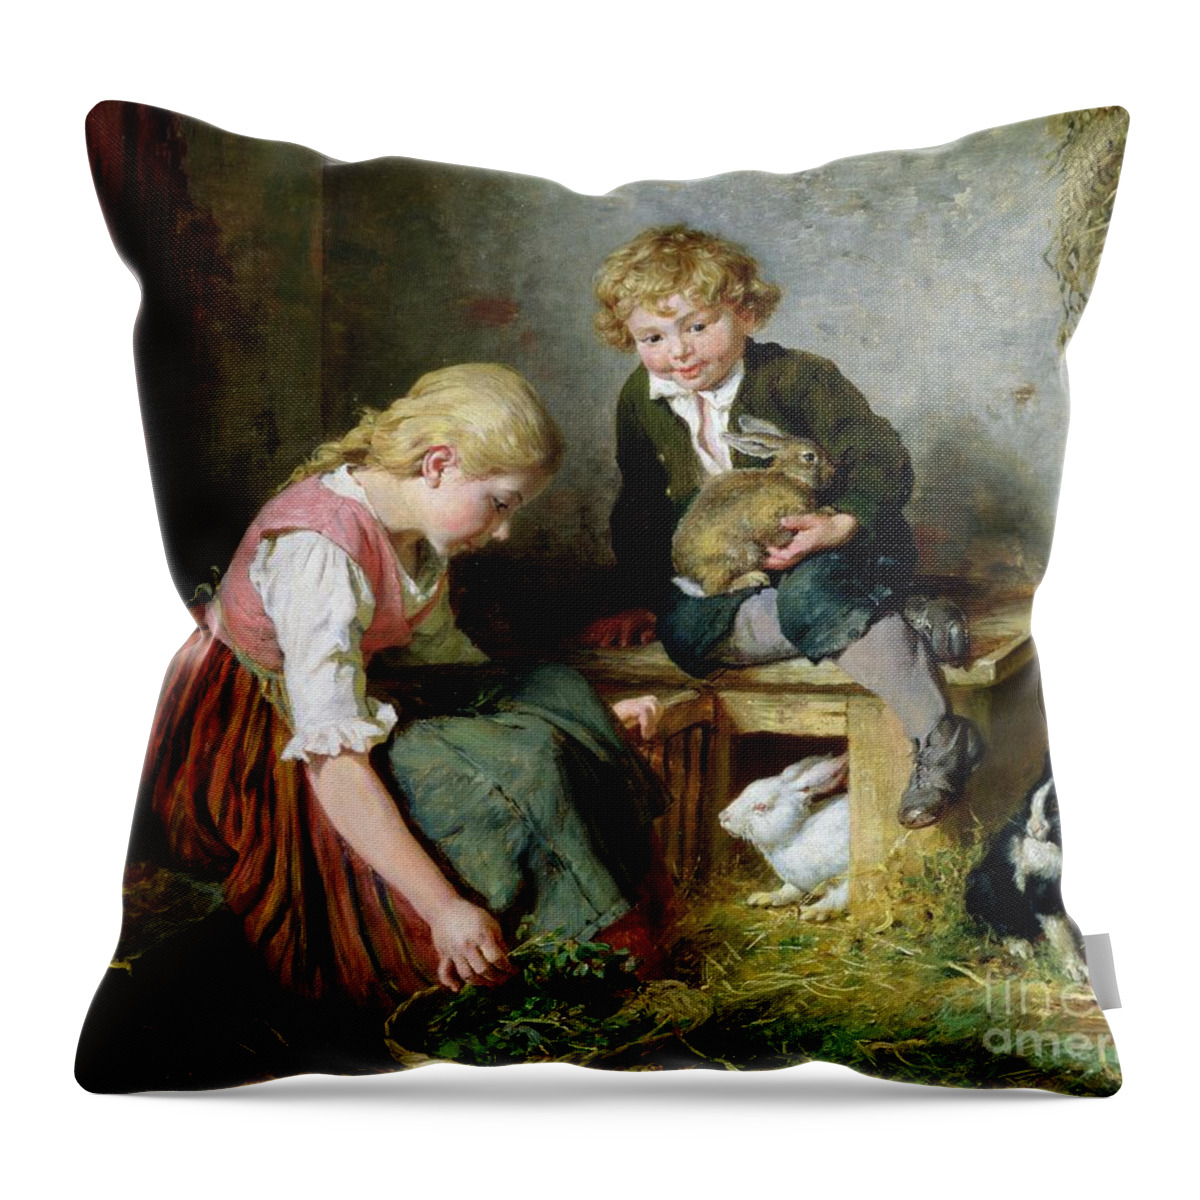 Feeding Throw Pillow featuring the painting Feeding the Rabbits by Felix Schlesinger